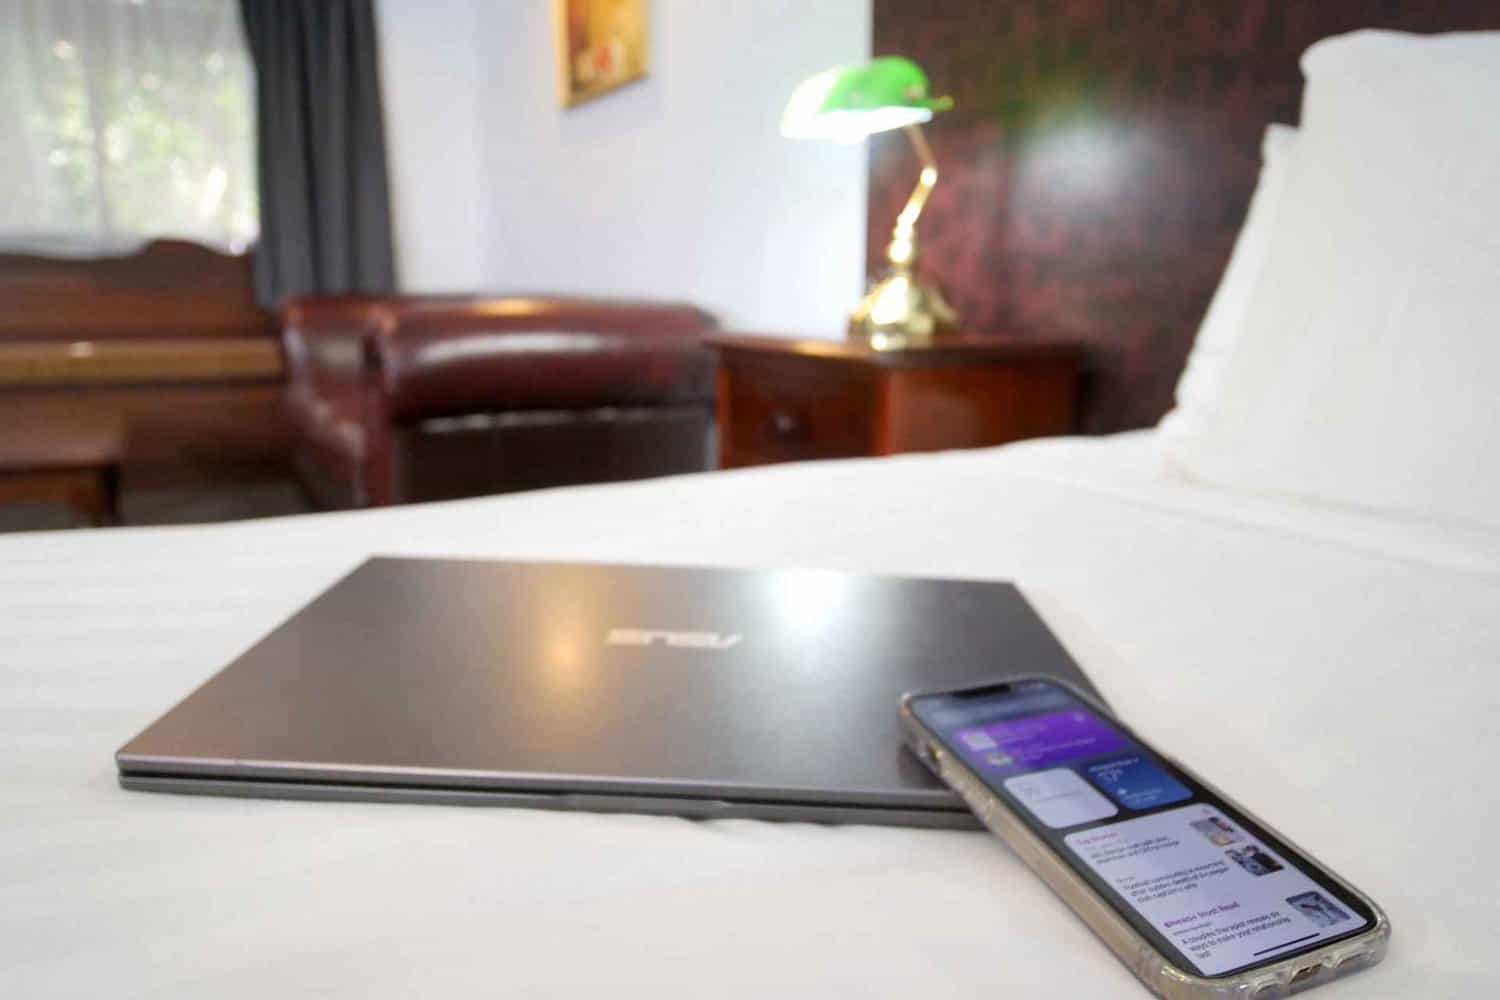 A close-up view of a laptop and phone on a hotel bed, with a couch and bedside table in the distance, signifying a comfortable environment for guests to relax after securing their hotel deposit.